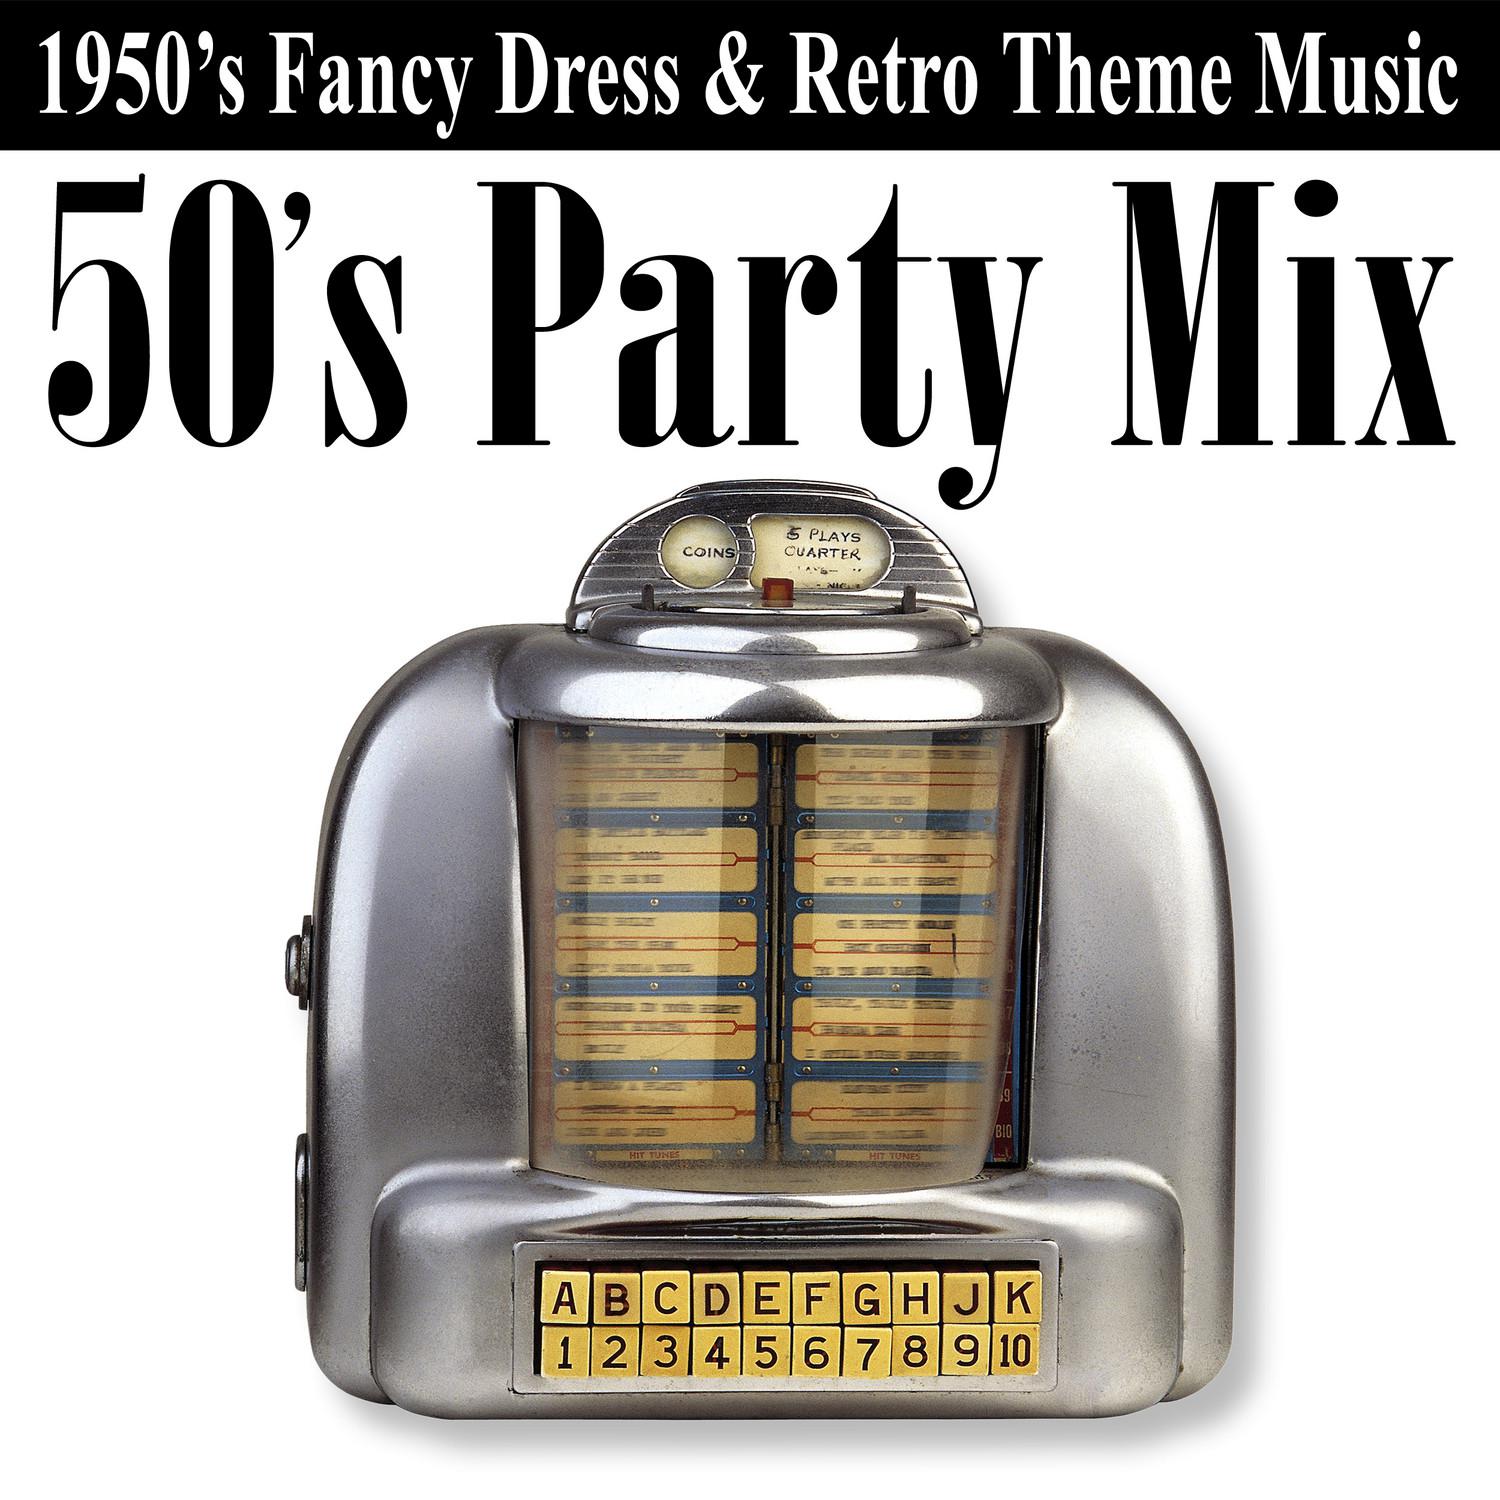 Diana (50's Party Mix)